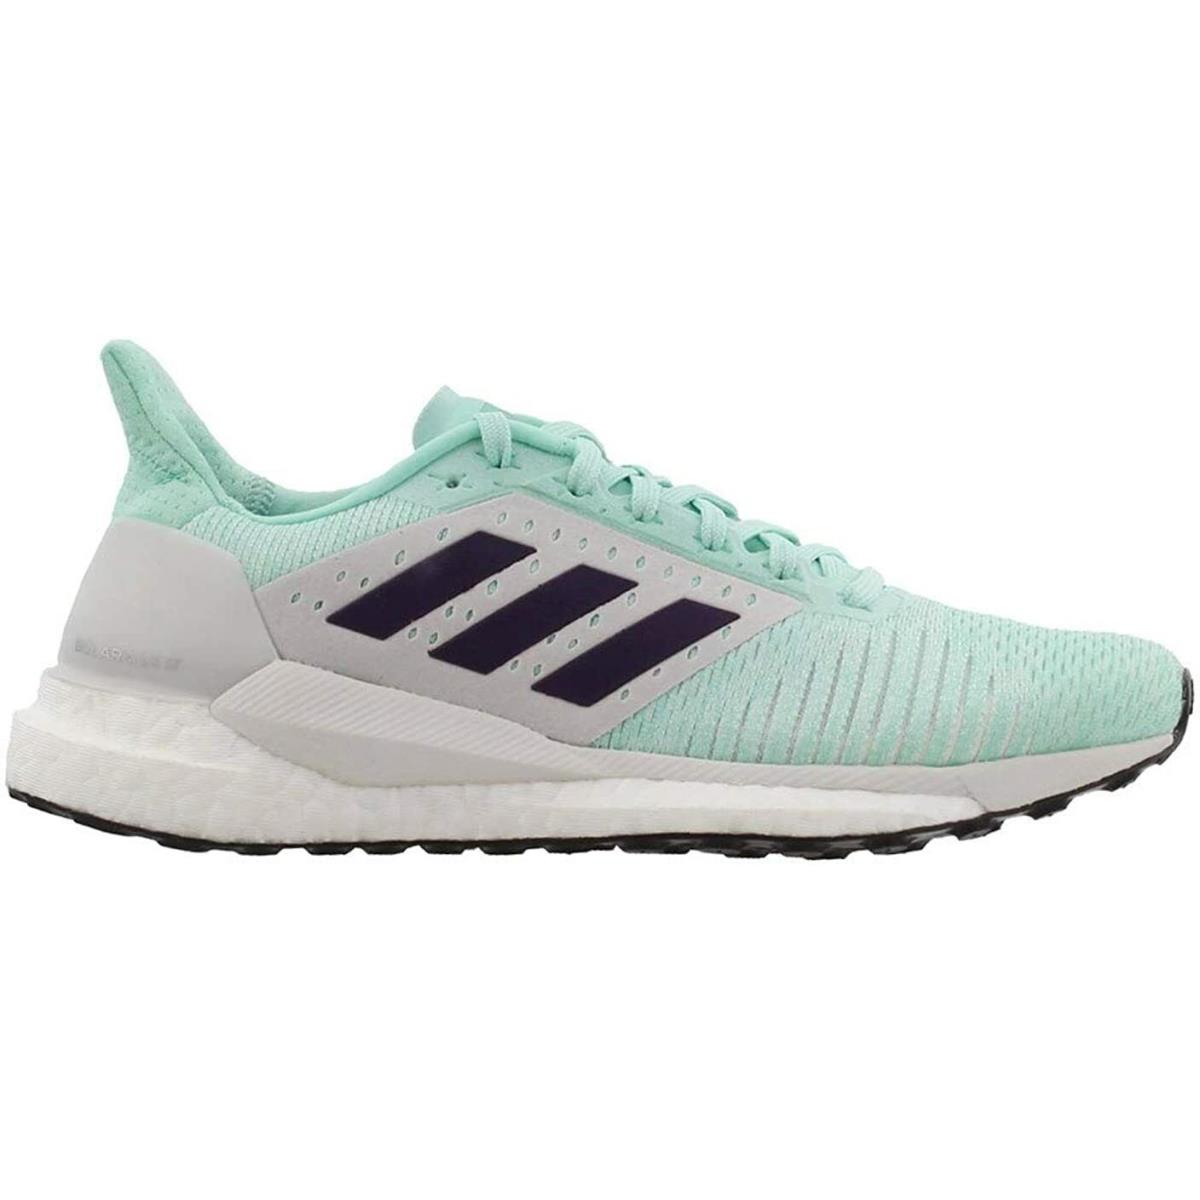 Adidas Women`s Solar Glide ST Running Casual Shoe Mint/grey Color Size 5.5 - Mint/Grey